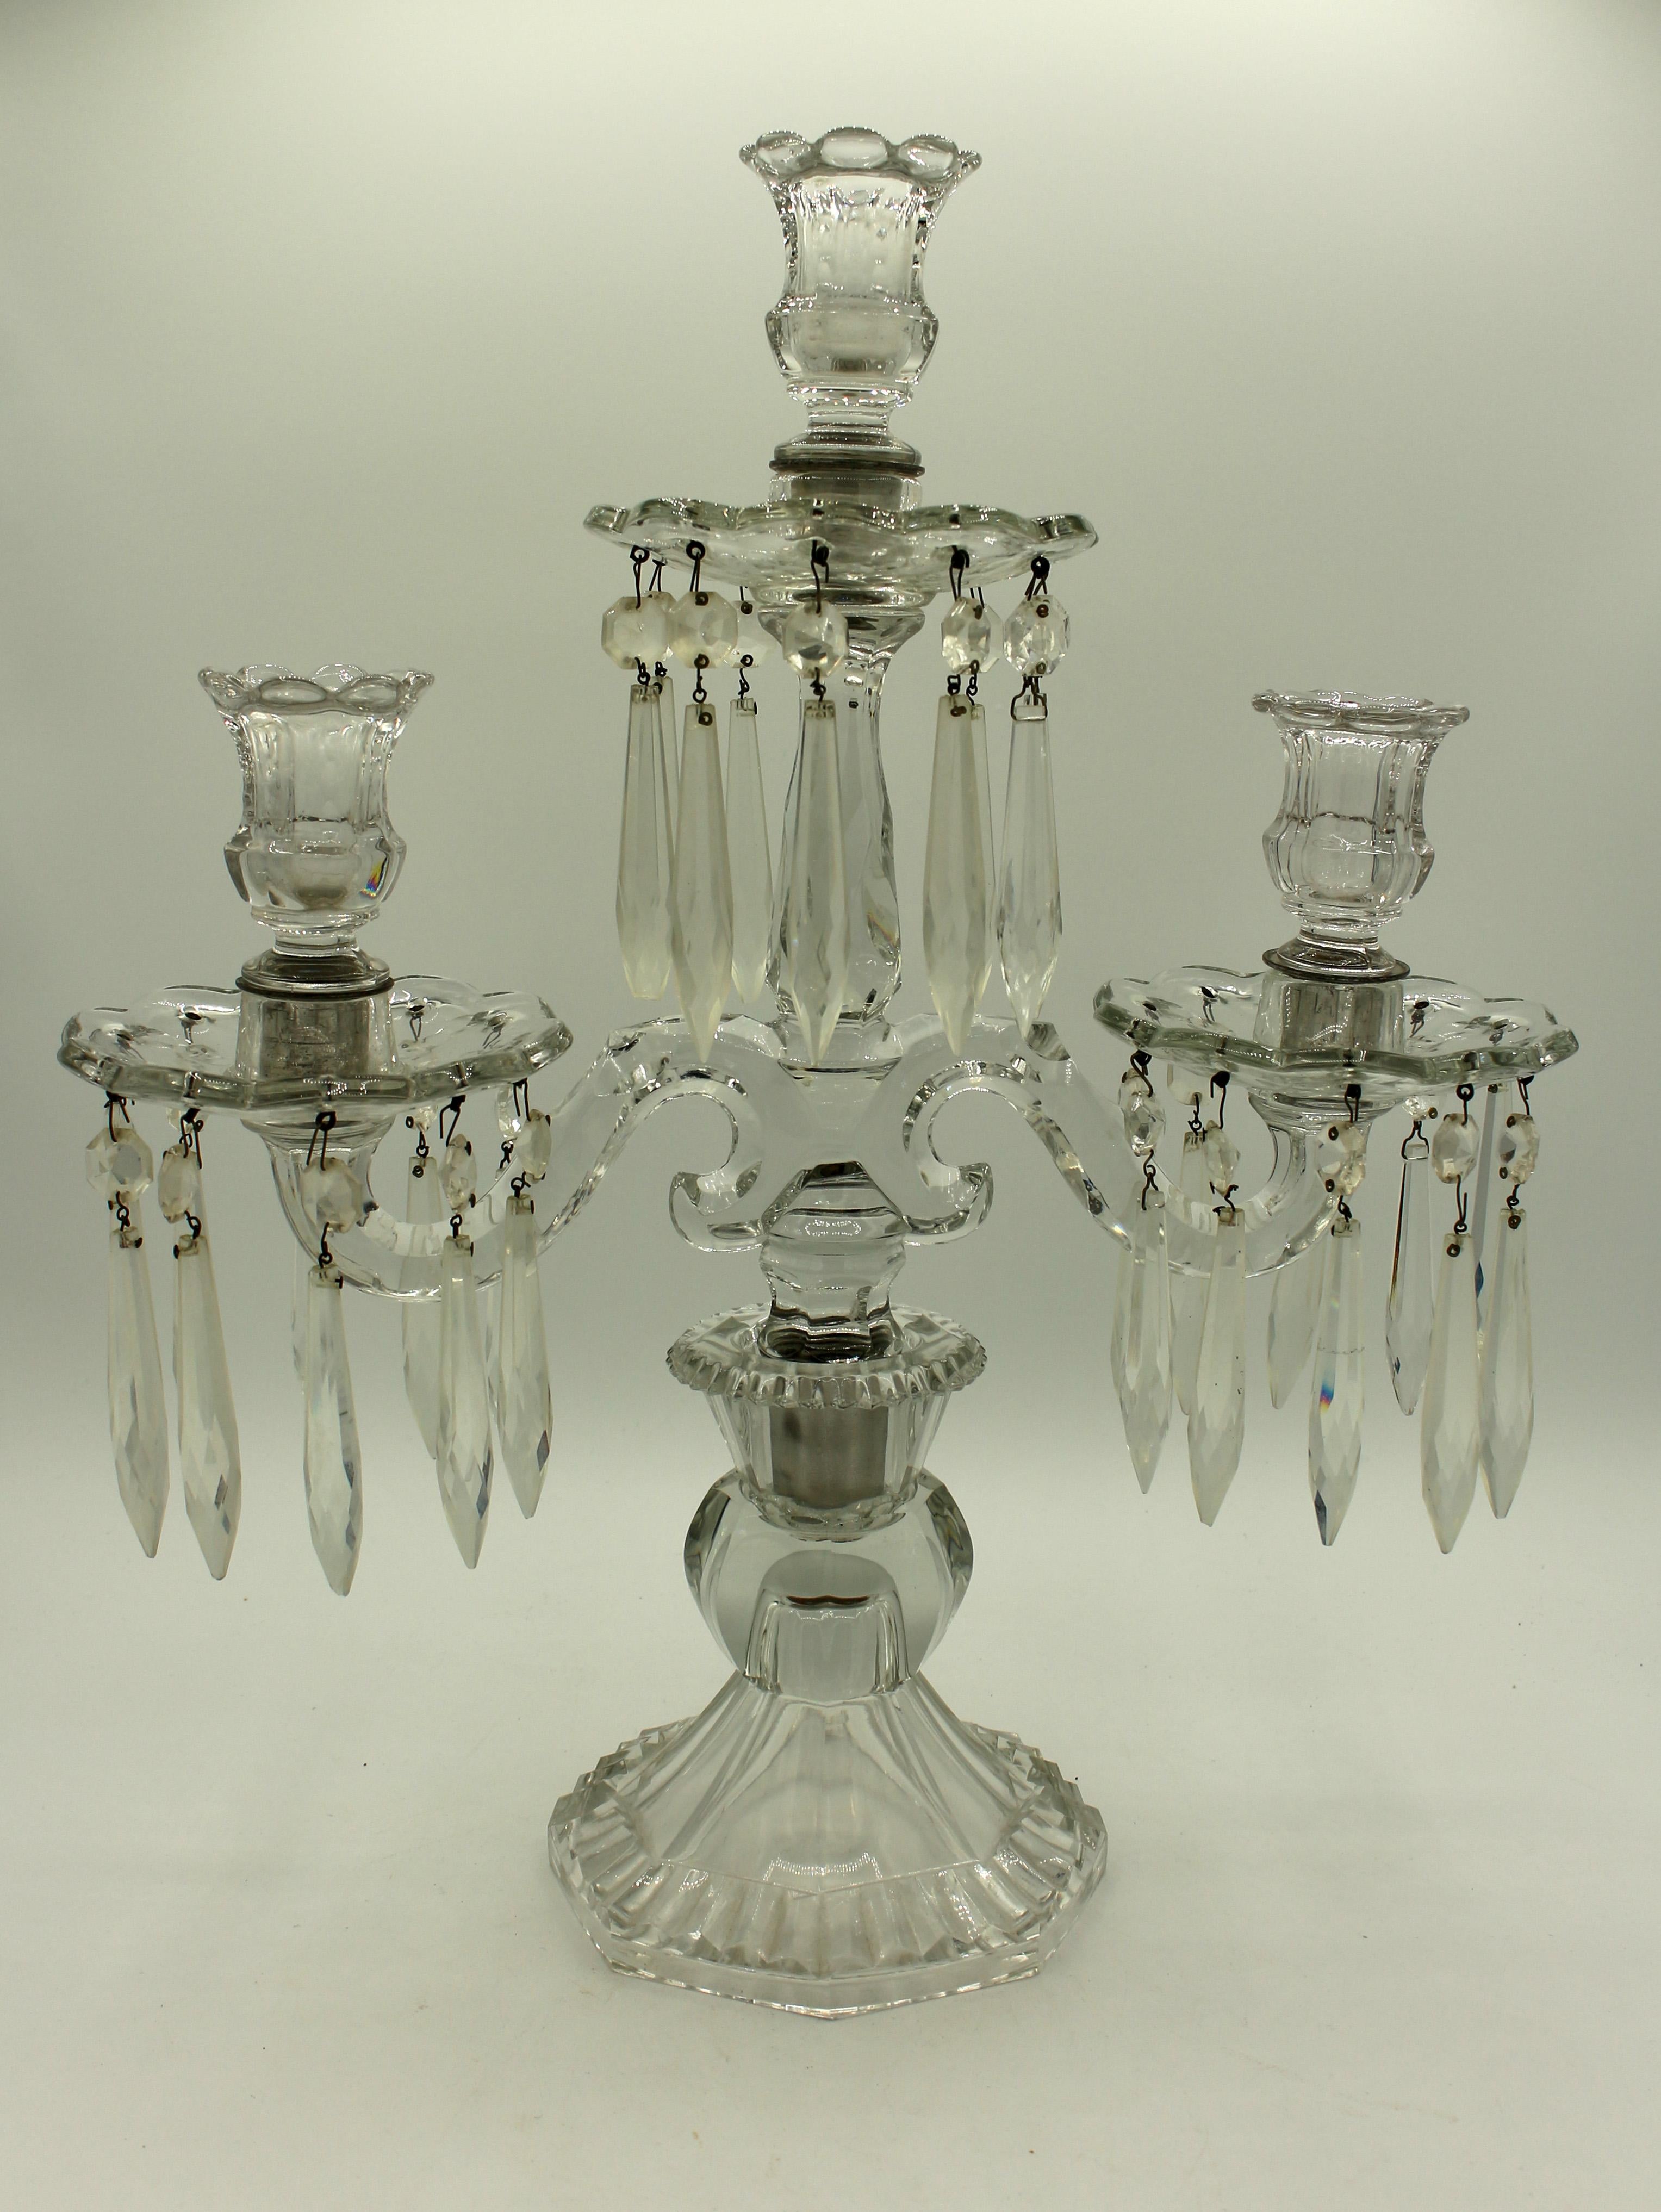 Early 20th century pair of 3-light cut glass candelabras, attributed to Heisey. While the arms are 